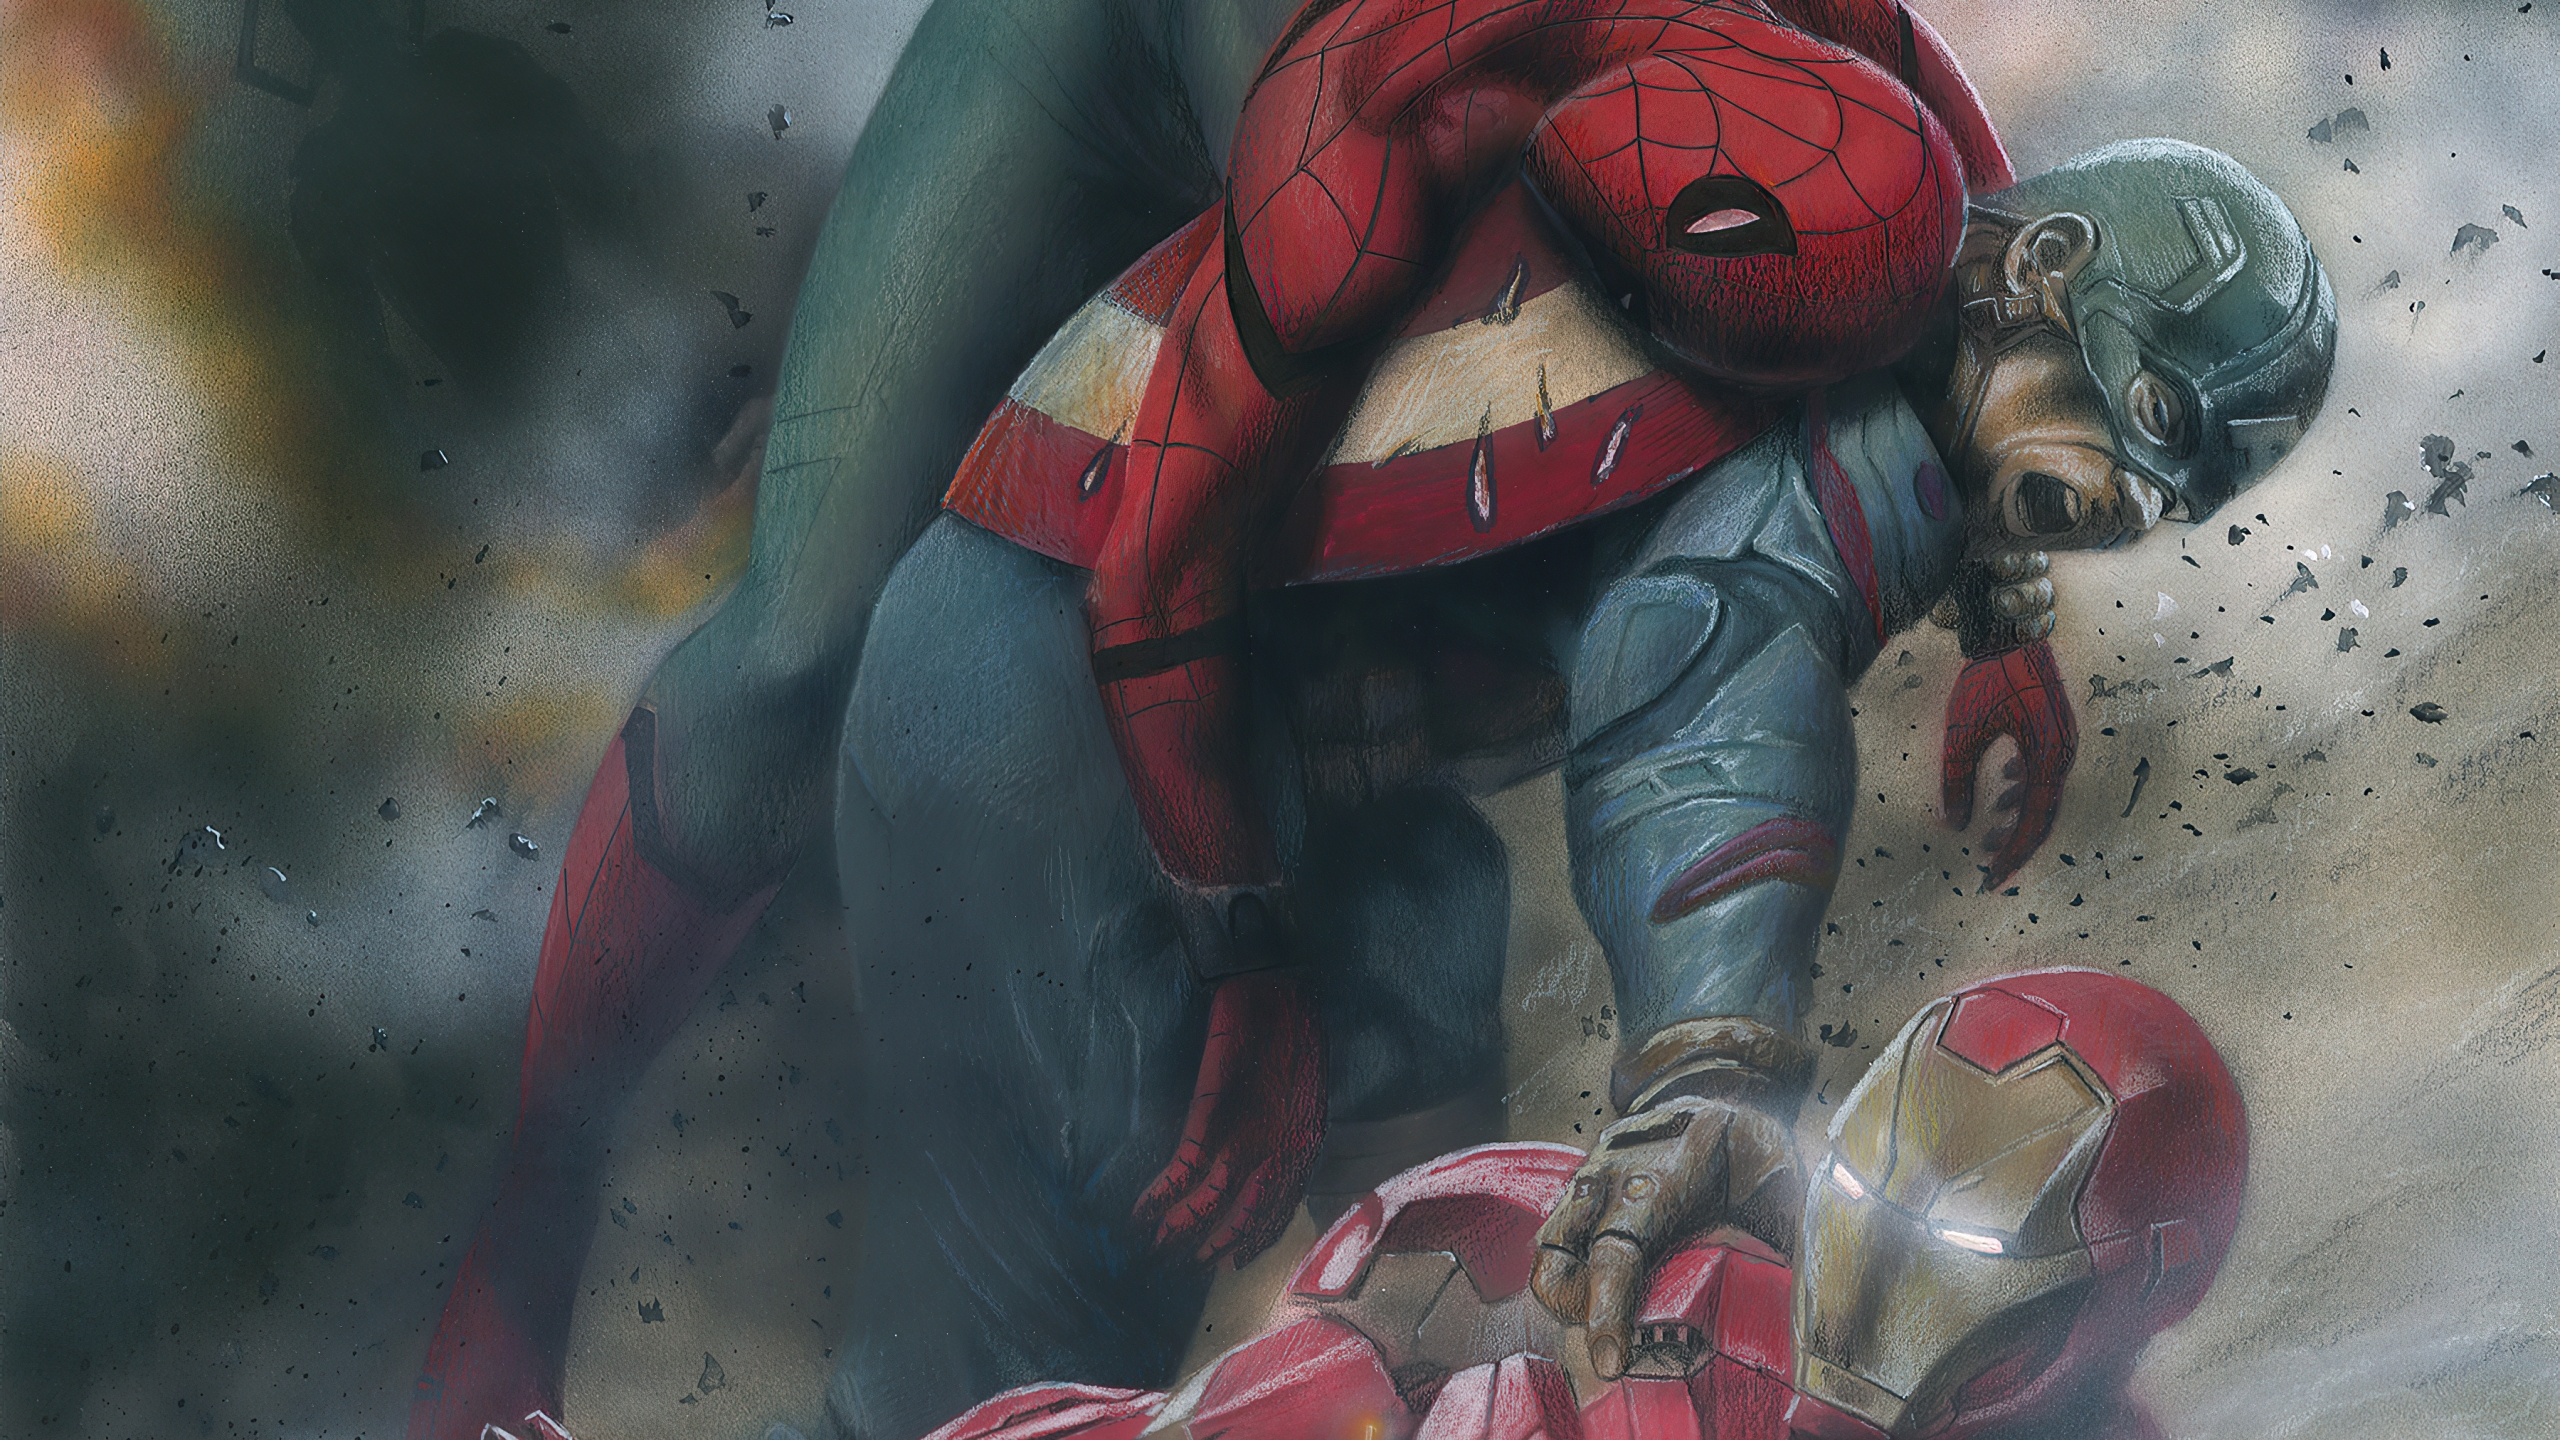 Captain America, Spiderman and Iron man in fight Wallpaper ID:5974